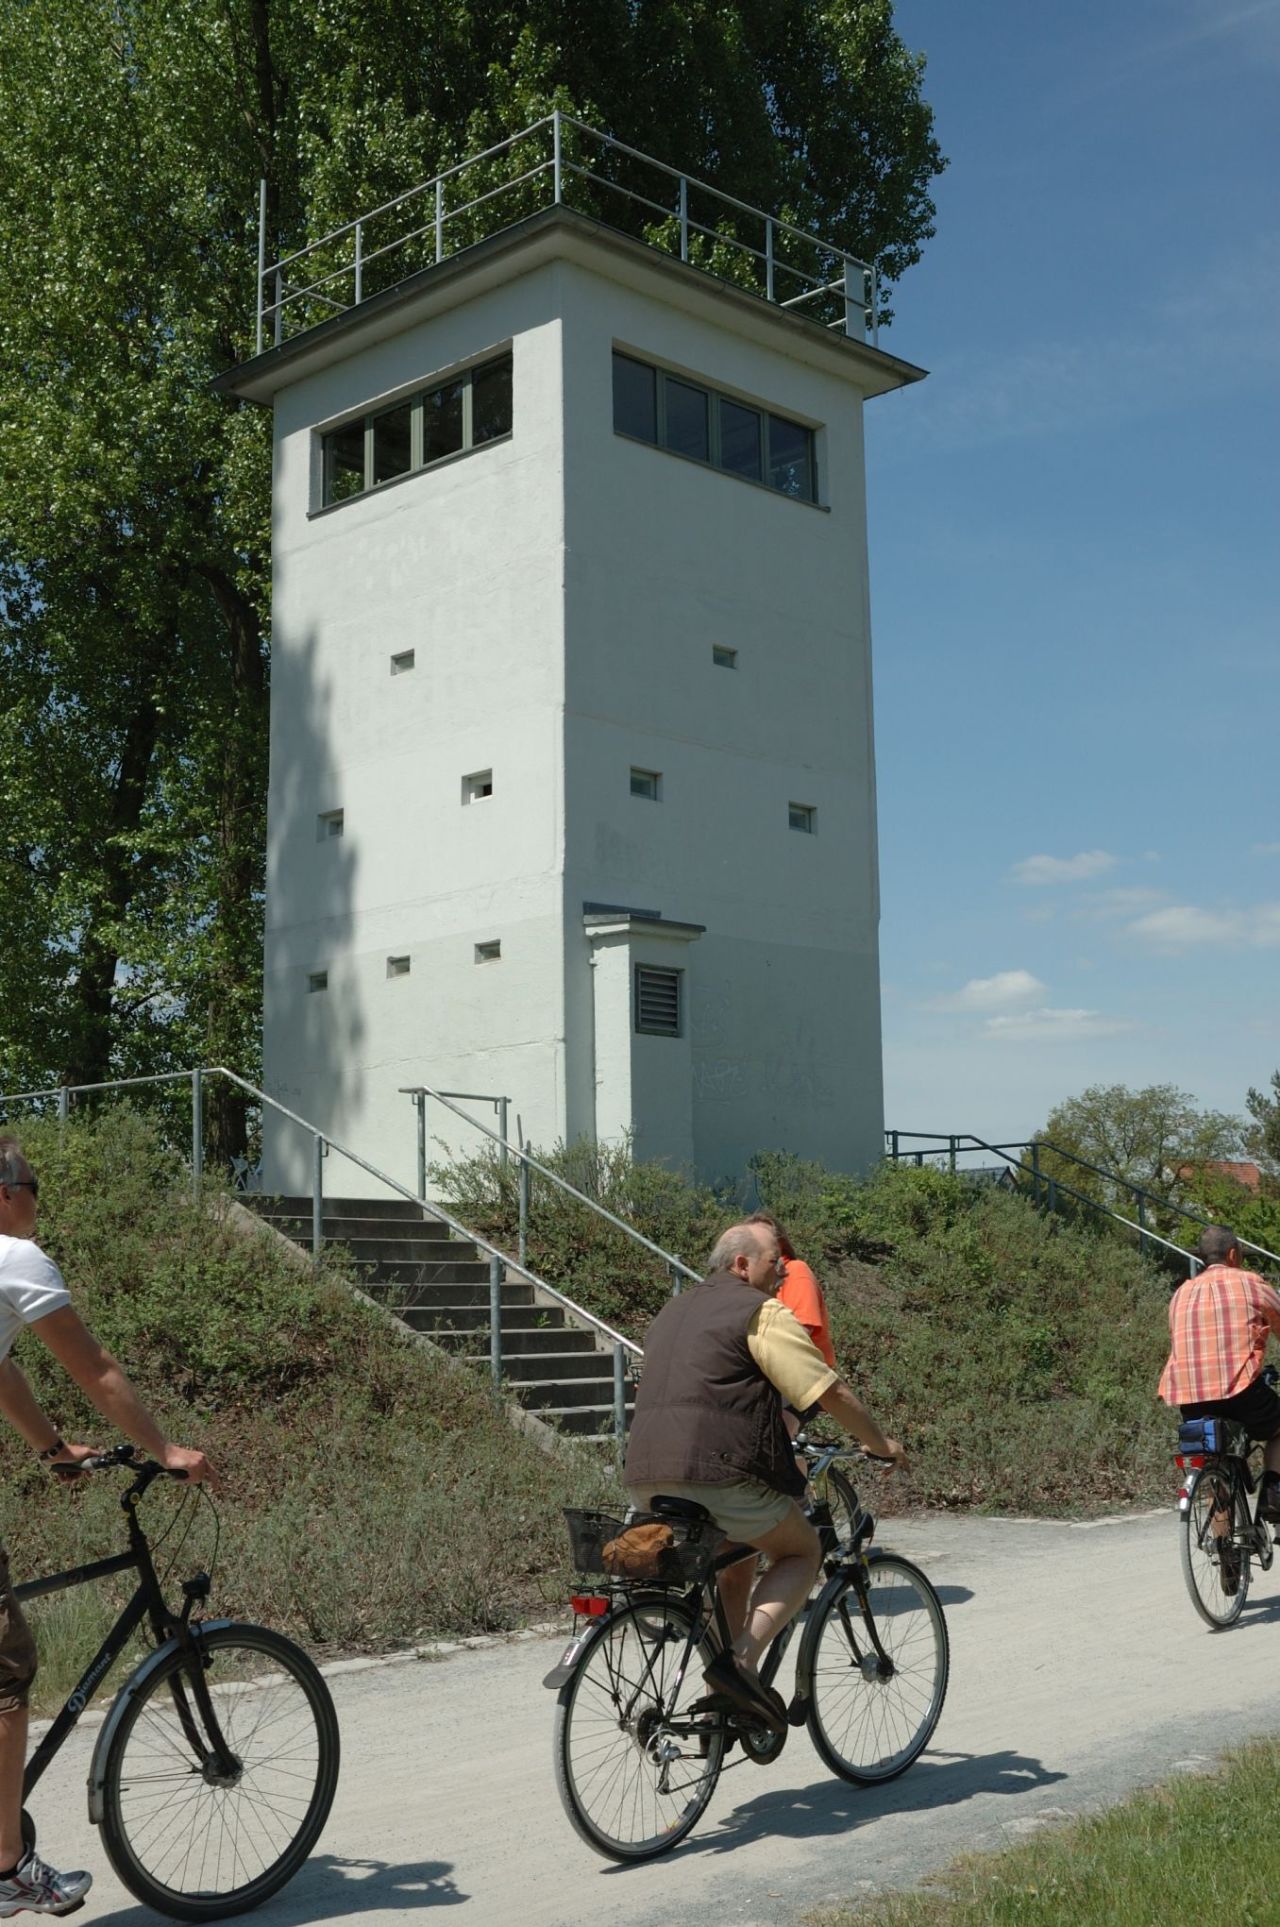 Every section of the Berlin Wall Trail is accessible by the city's bike-friendly public transportation system.